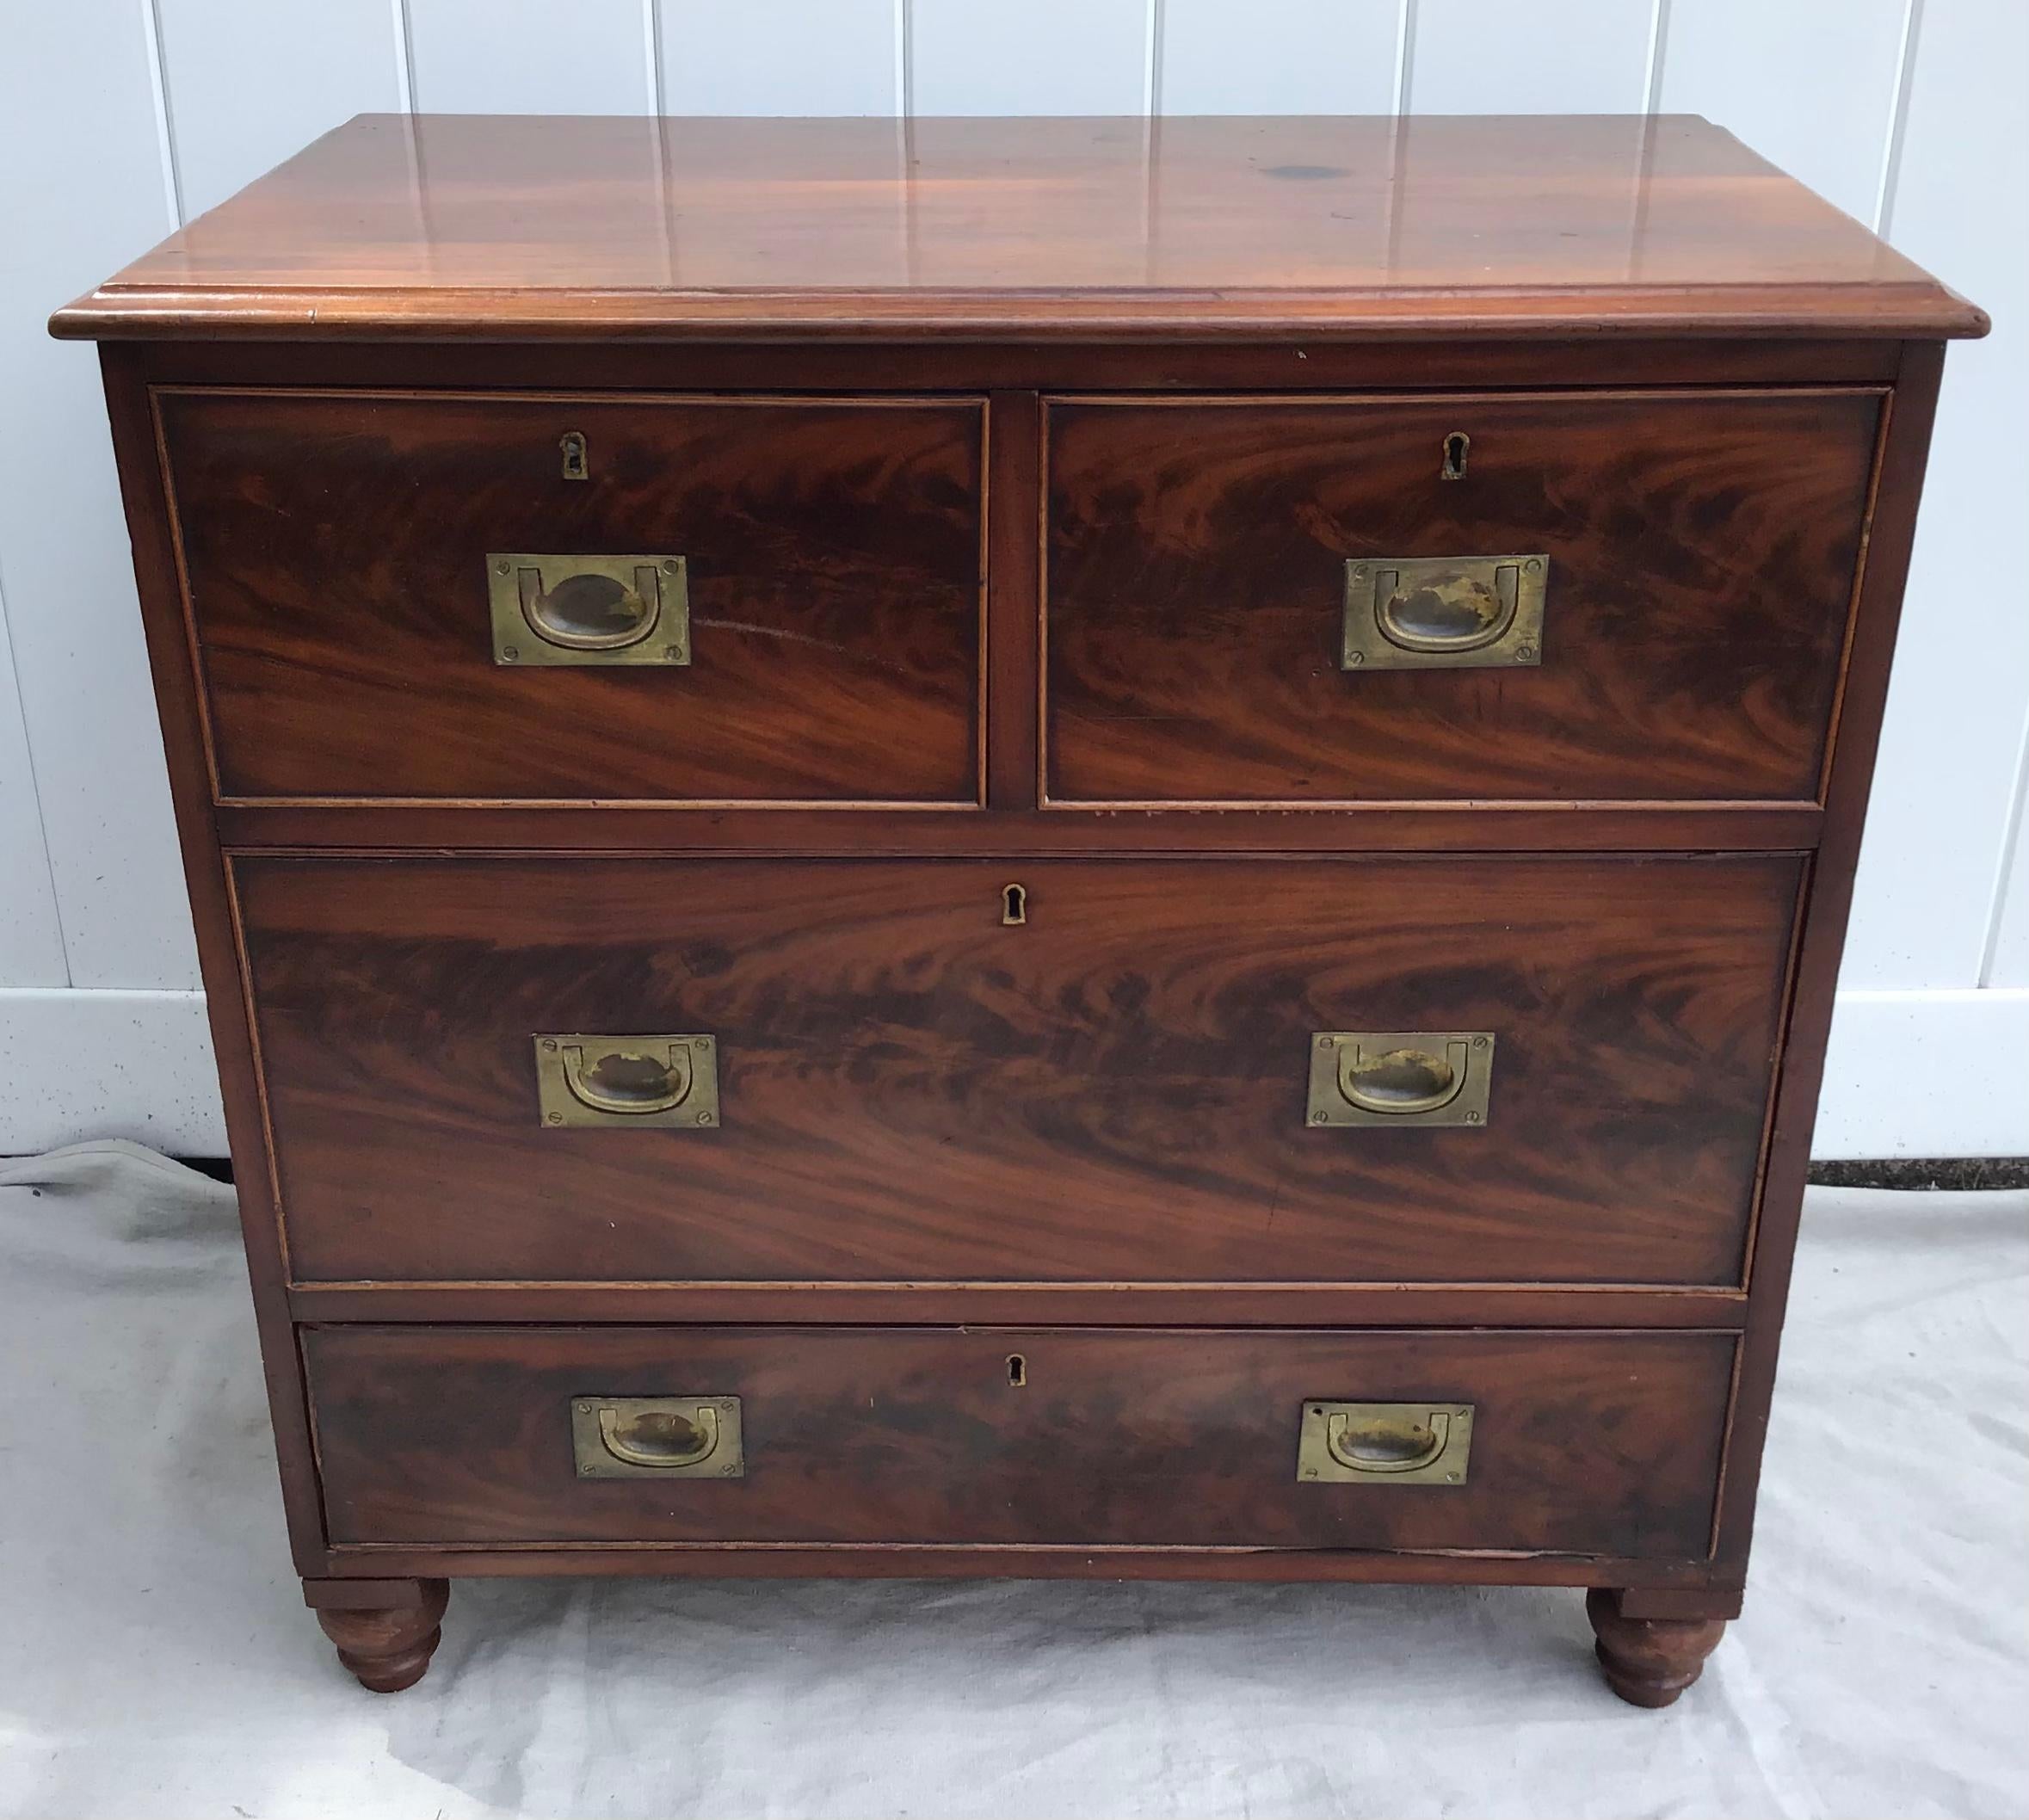 An English highly figured mahogany campaign chest from the mid-19th century, with four drawers, brass hardware and bun feet. Born in England during the 19th century, this campaign chest features a rectangular top sitting above four dovetailed